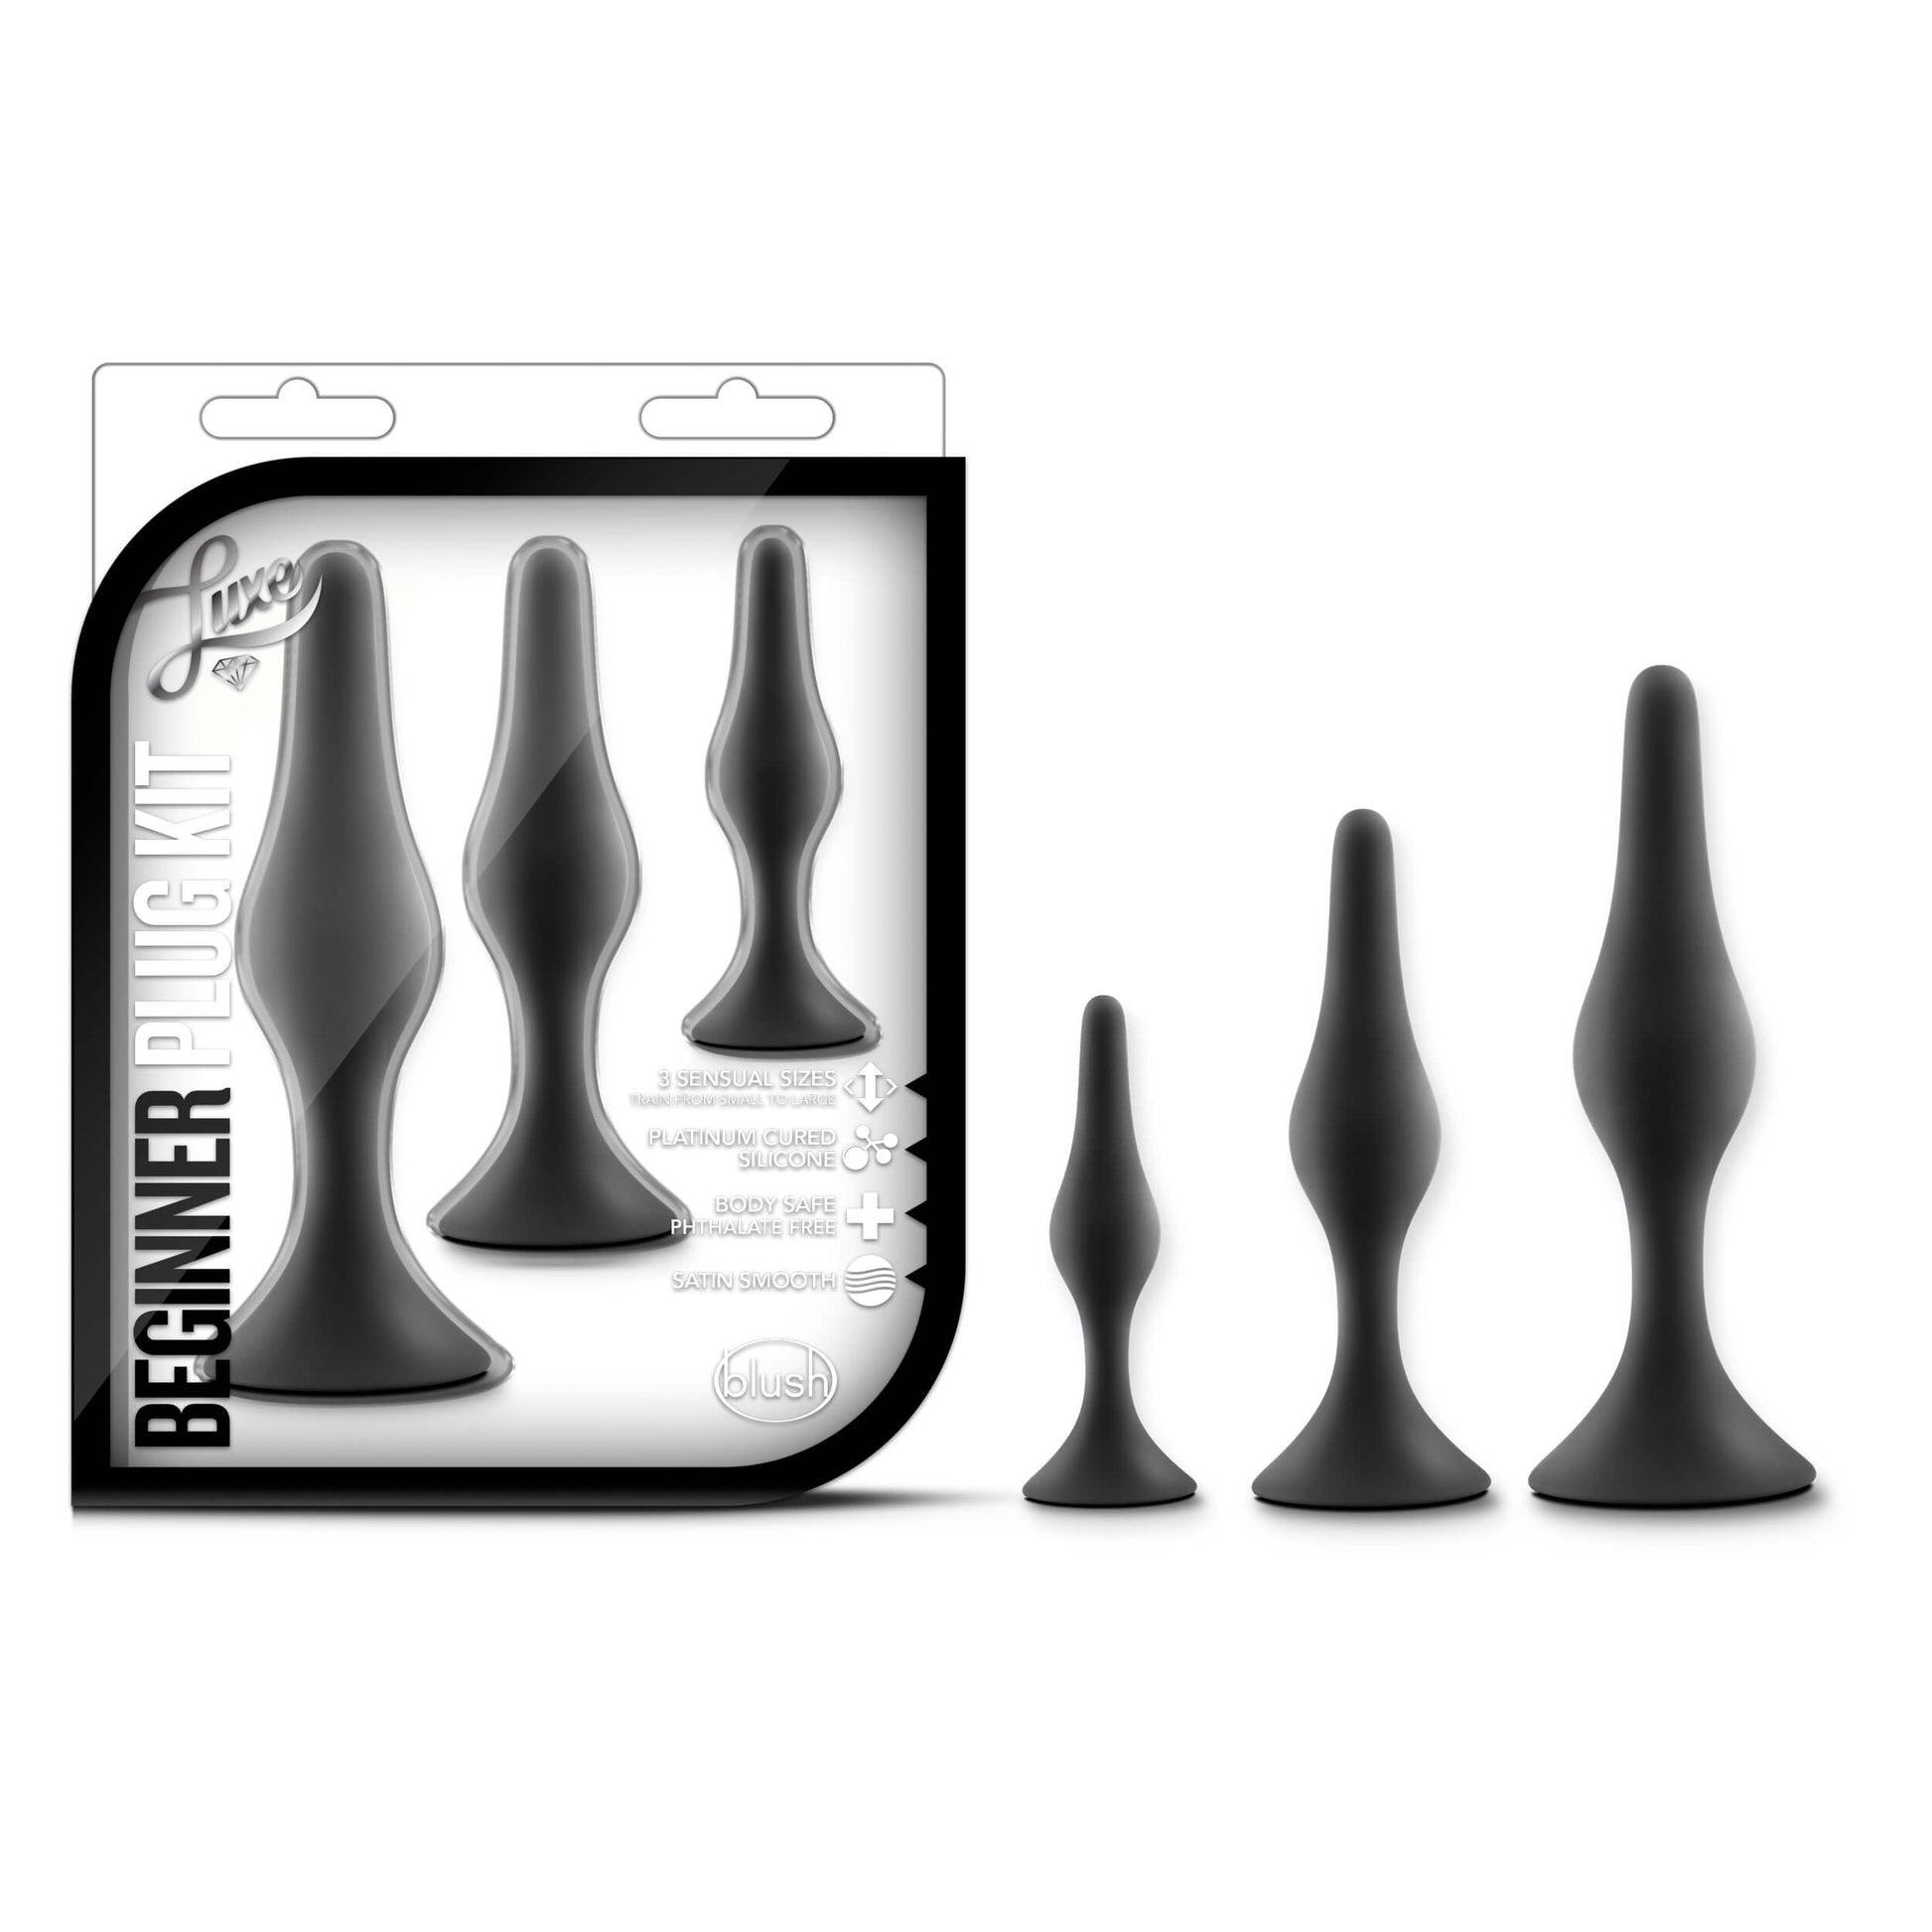 Luxe Beginner Plug Kit - Blush Novelties - The Bigger O - The Bigger O - online sex toy shop USA, Canada & UK shipping available